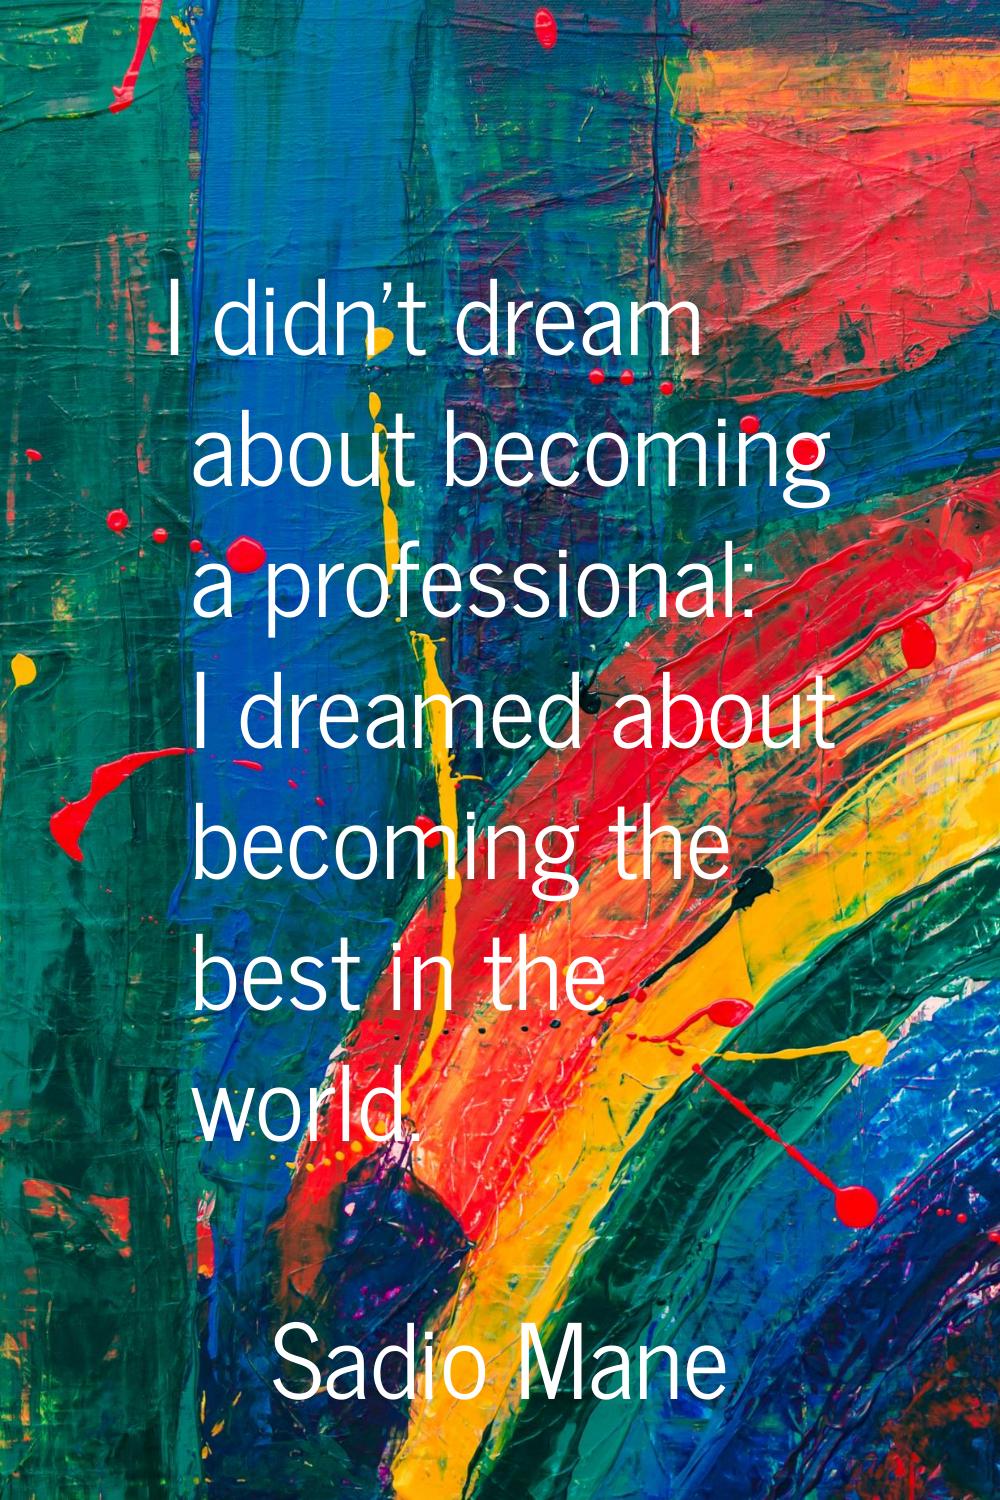 I didn't dream about becoming a professional: I dreamed about becoming the best in the world.